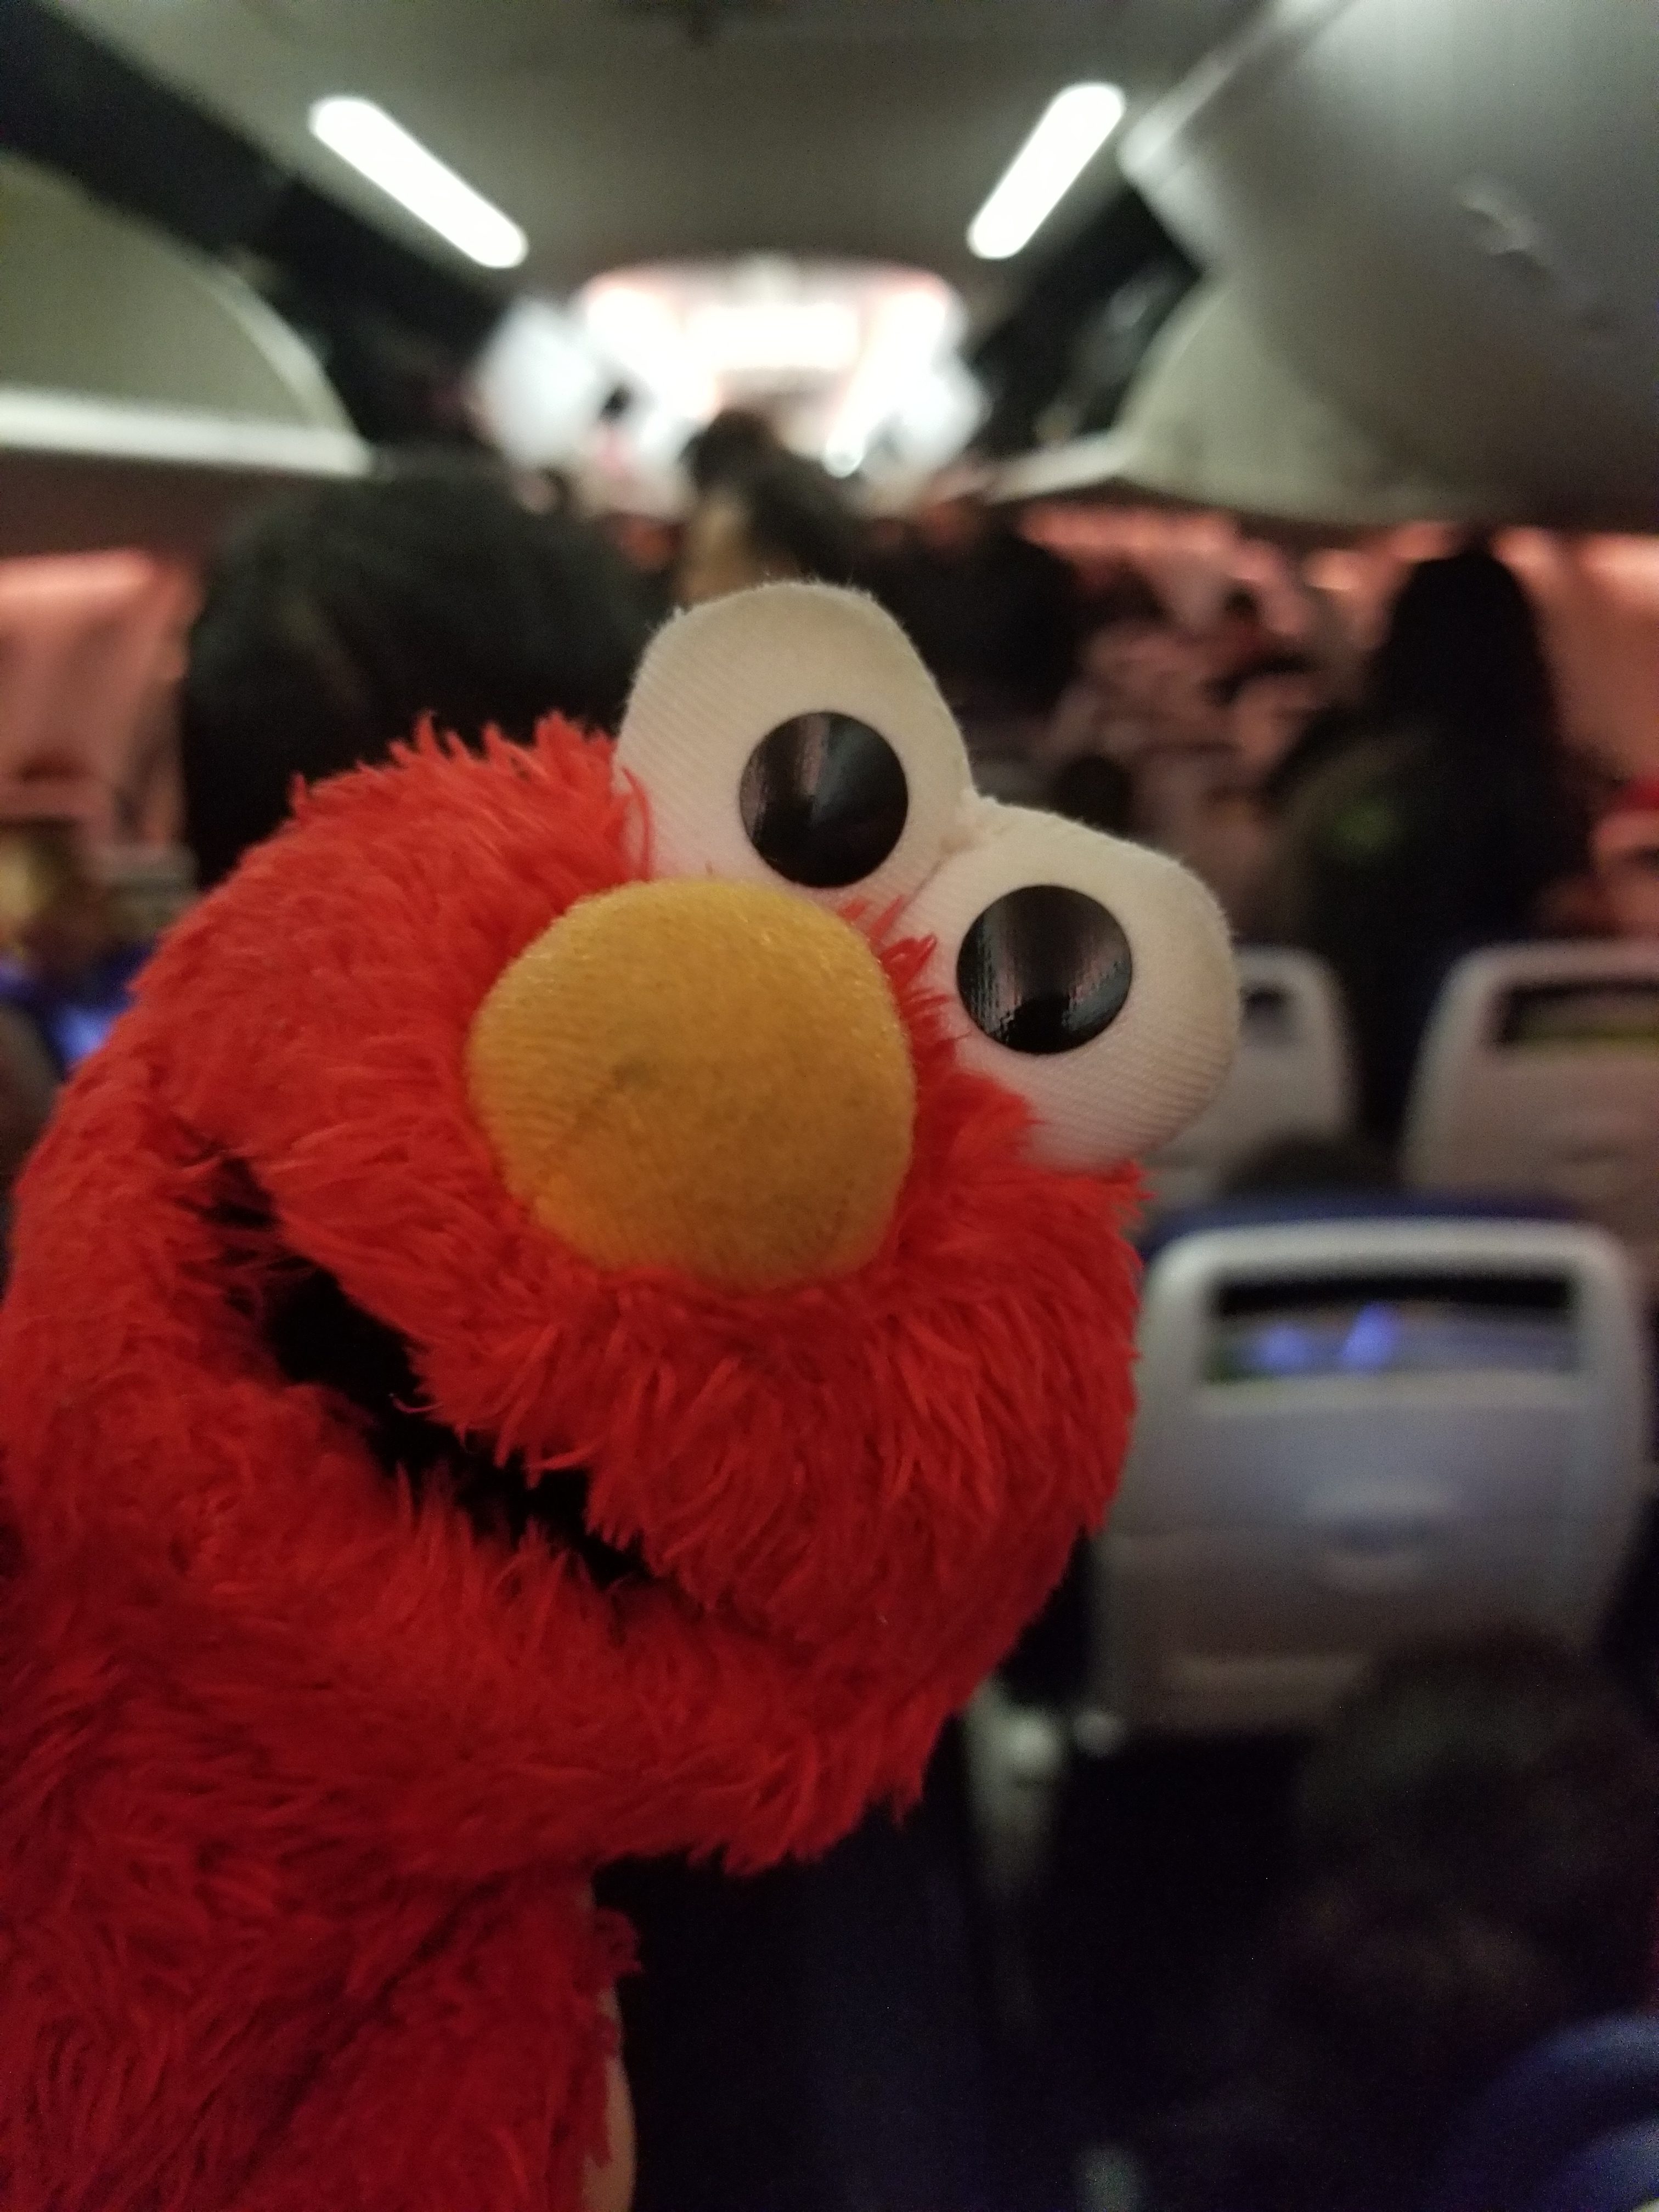 Flight has landed, Elmo waits to get off the plane